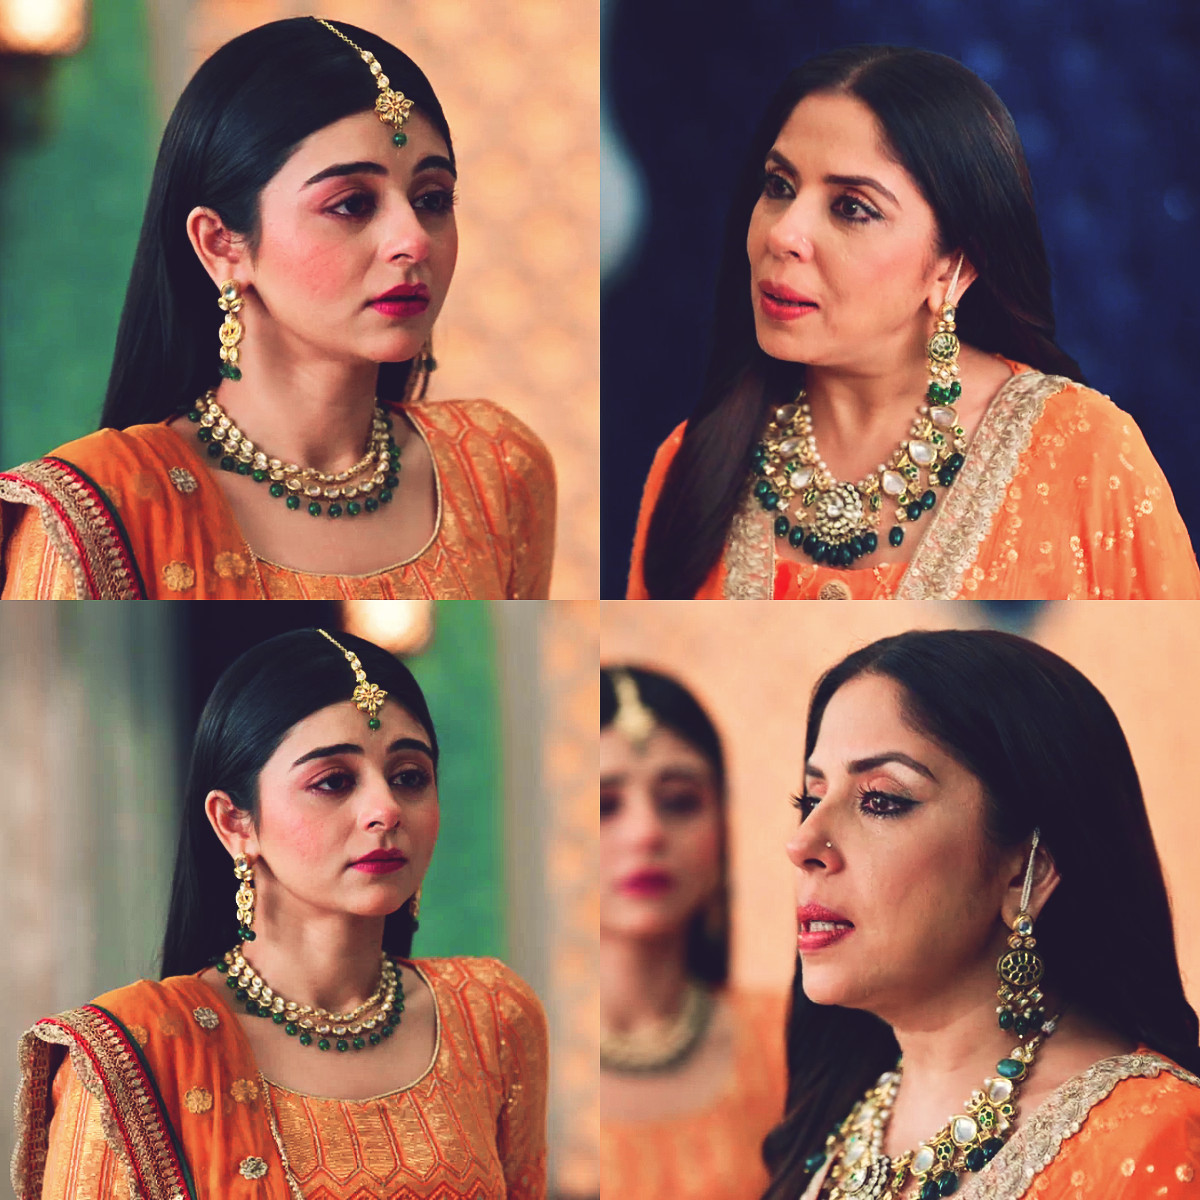 so, Mannat cries once and the world is at her feet then it's all forgotten the next day like nothing happened

but Ibadat has to cry even beg but in return she gets insults, false accusations and she's even cursed repeatedly

well, Dua is starting to annoy me.

#RabbSeHaiDua